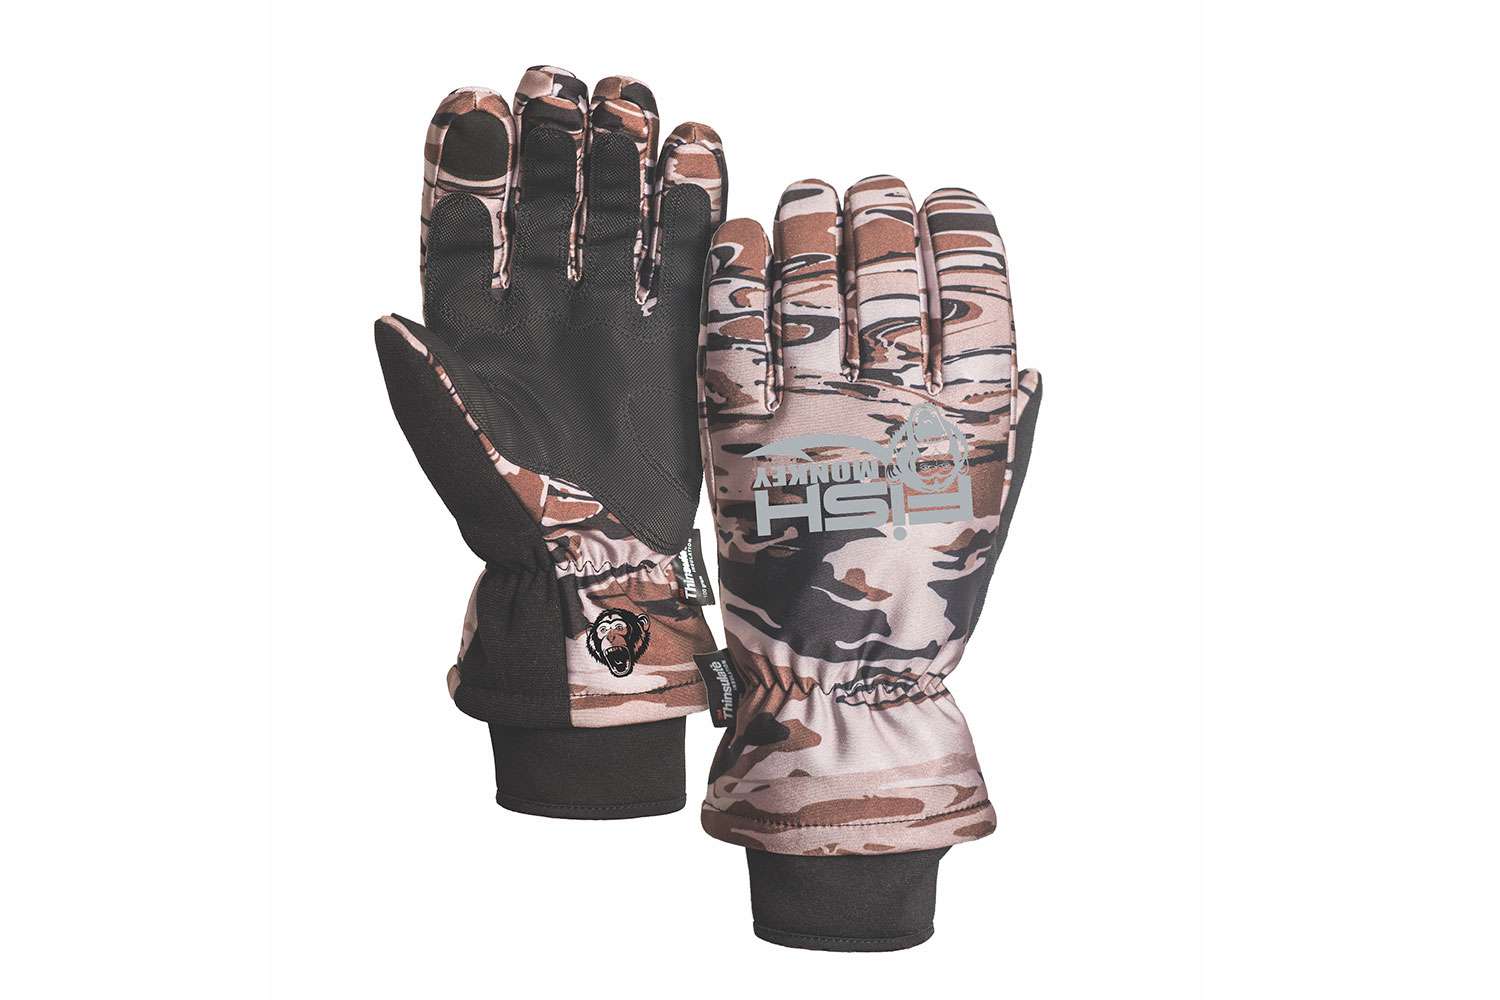 <p><b>Fish Monkey Tundra EX, $69.95</b></p> New for fall and winter, Fish Monkey just unveiled its Tundra EX Series âa totally waterproof, premium insulated full finger fishing glove. Fish Monkeyâs âCold Busting Technologyâ wraps your hands in total warmth, dryness and comfort, while you focus on the task at hand and take your winter fishing to the next level. <br> <a href=